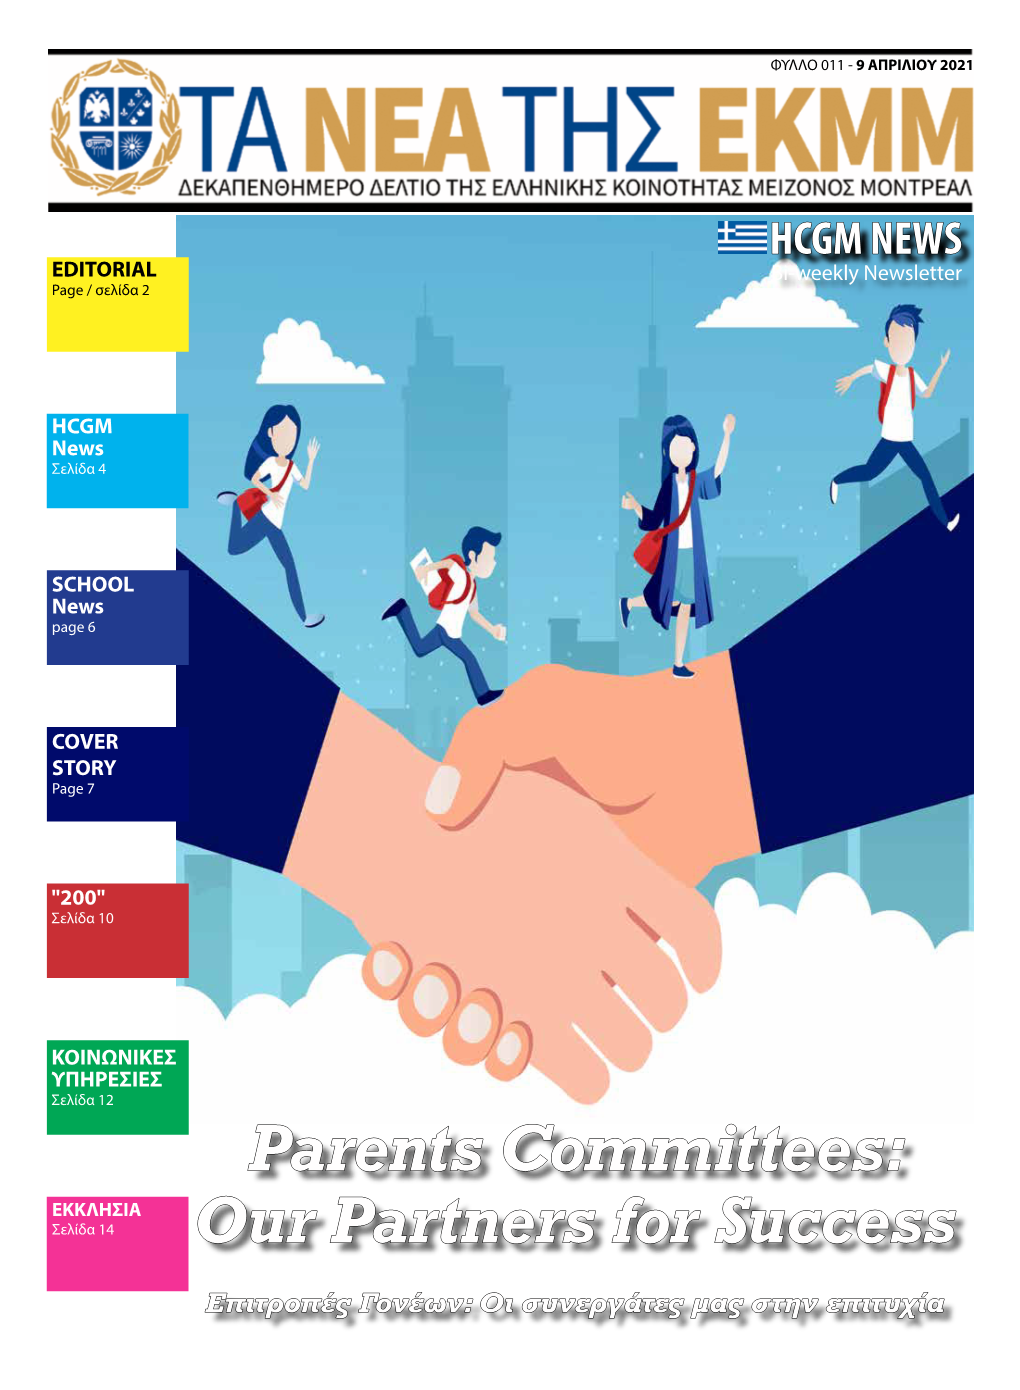 Parents Committees: Our Partners for Success